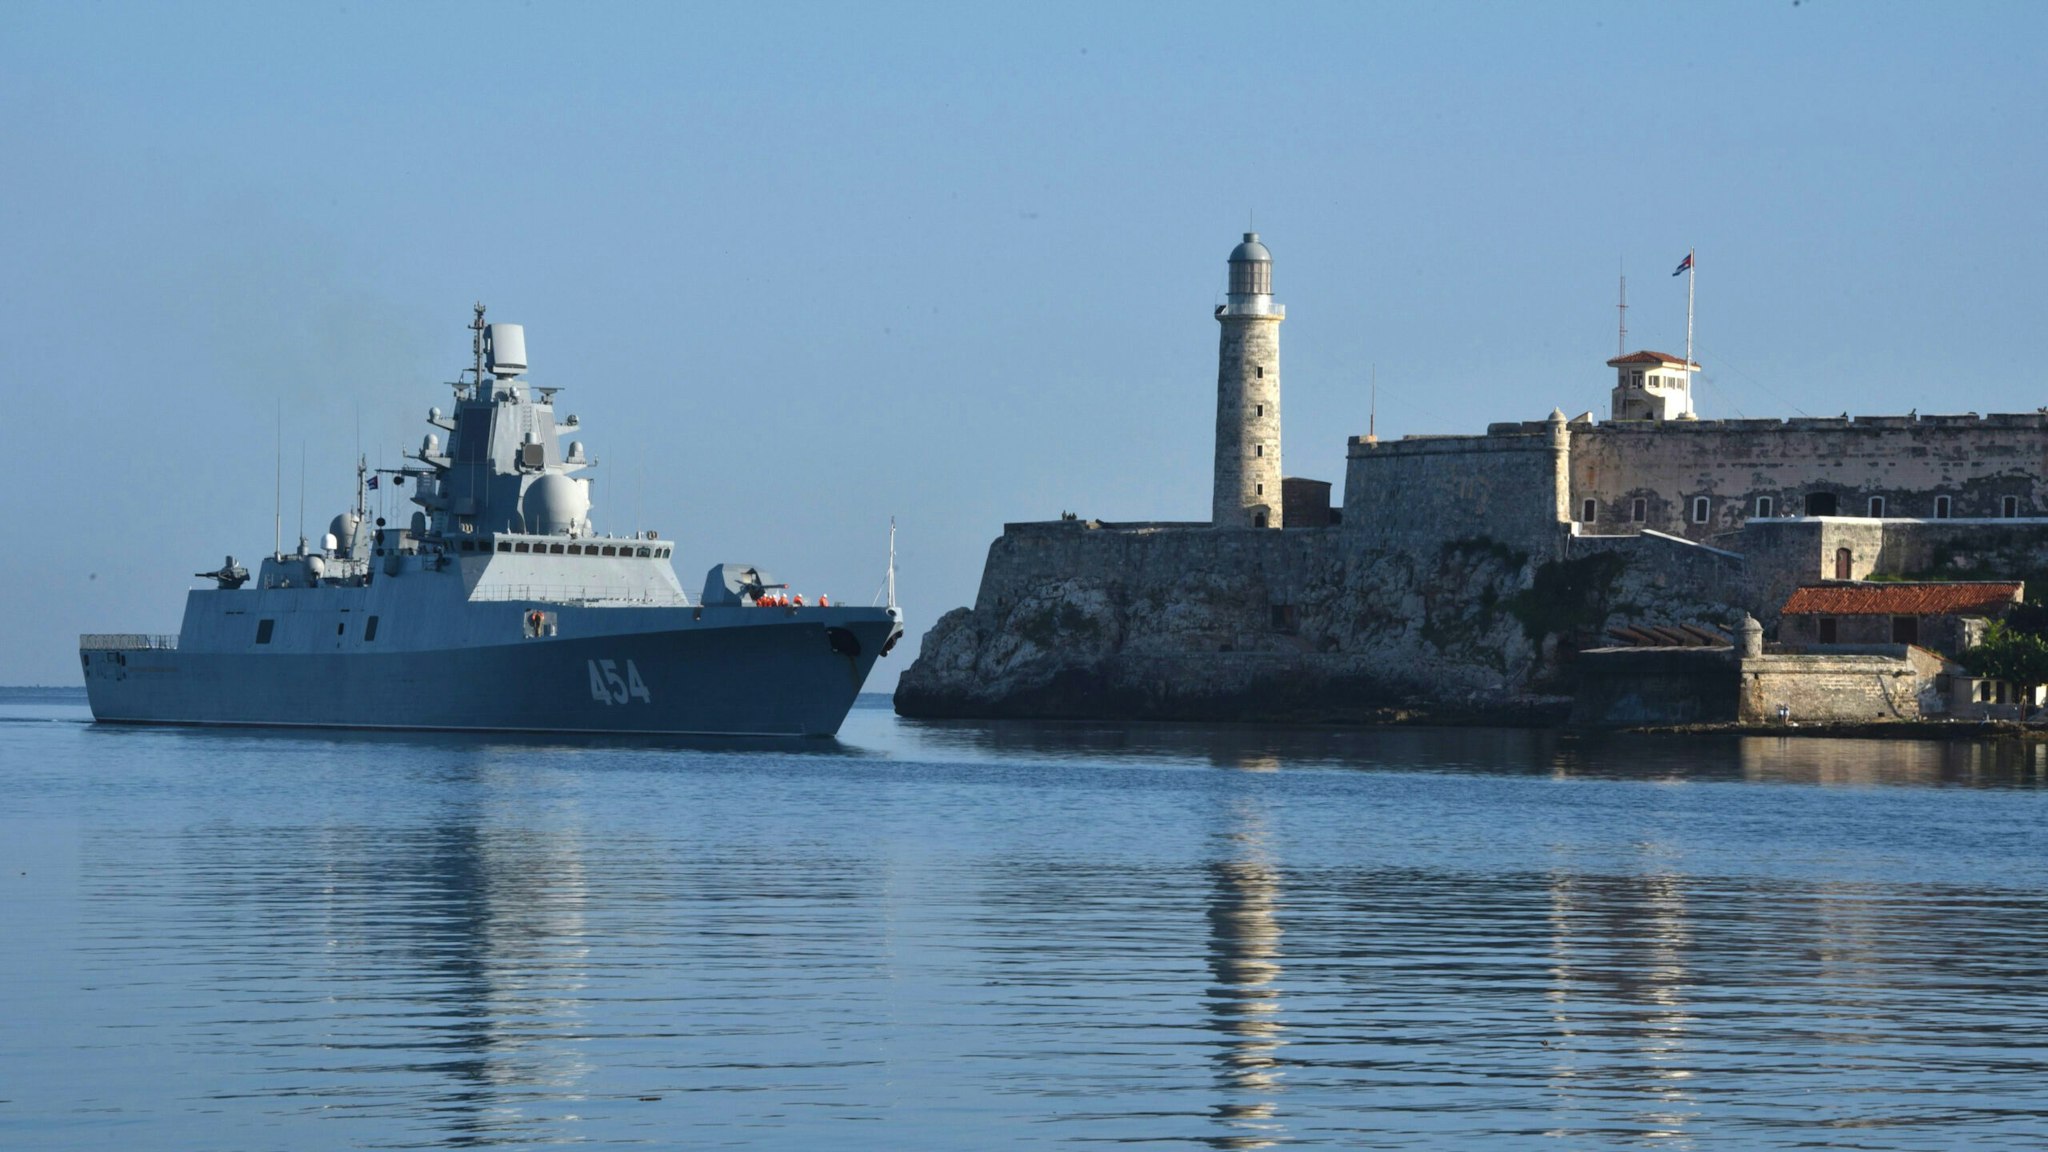 The Russian Federation Navy Admiral Gorshkov frigate arrives to Havana's port on June 24, 2019. - A Russian naval detachment, led by the frigate Admiral Gorshkov, arrived in Havana on Monday in times of high tension between the island and the United States.